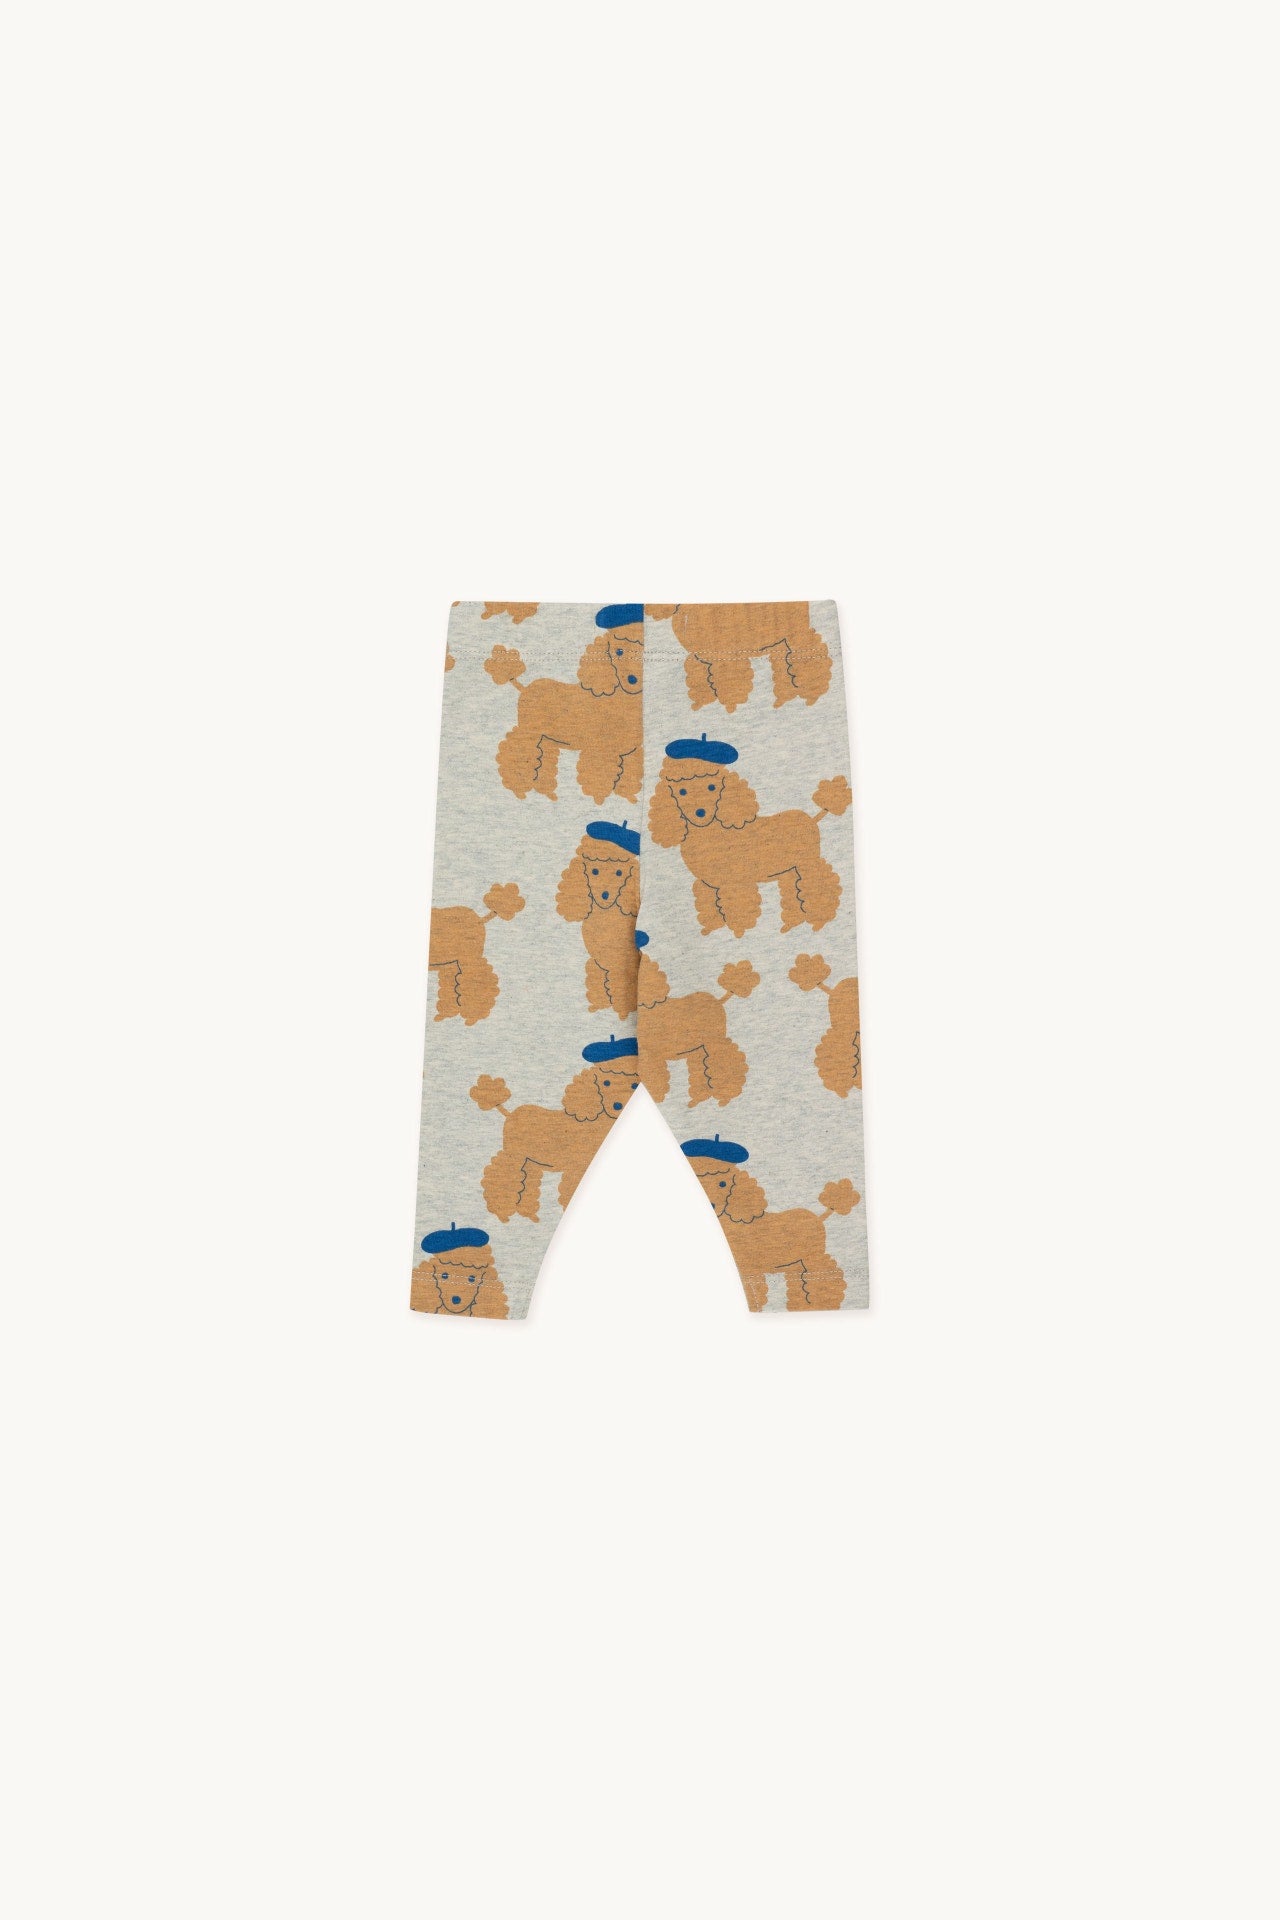 Light grey leggings with a brown poodle print and elasticized waistband. Crafted from soft pima cotton for maximum comfort. Made in Portugal.